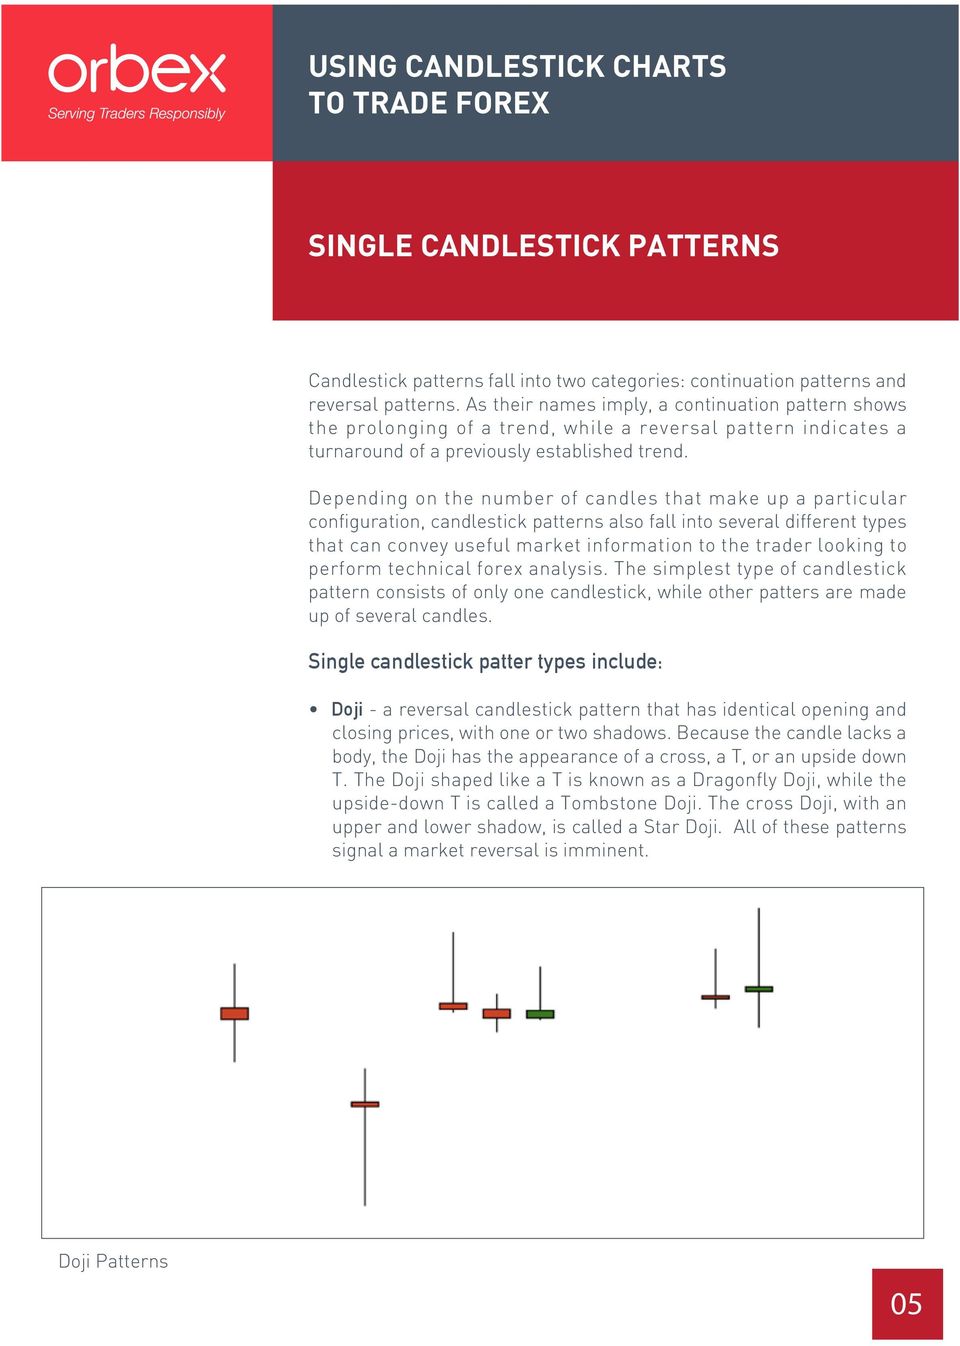 Depending on the number of candles that make up a particular configuration, candlestick patterns also fall into several different types that can convey useful market information to the trader looking